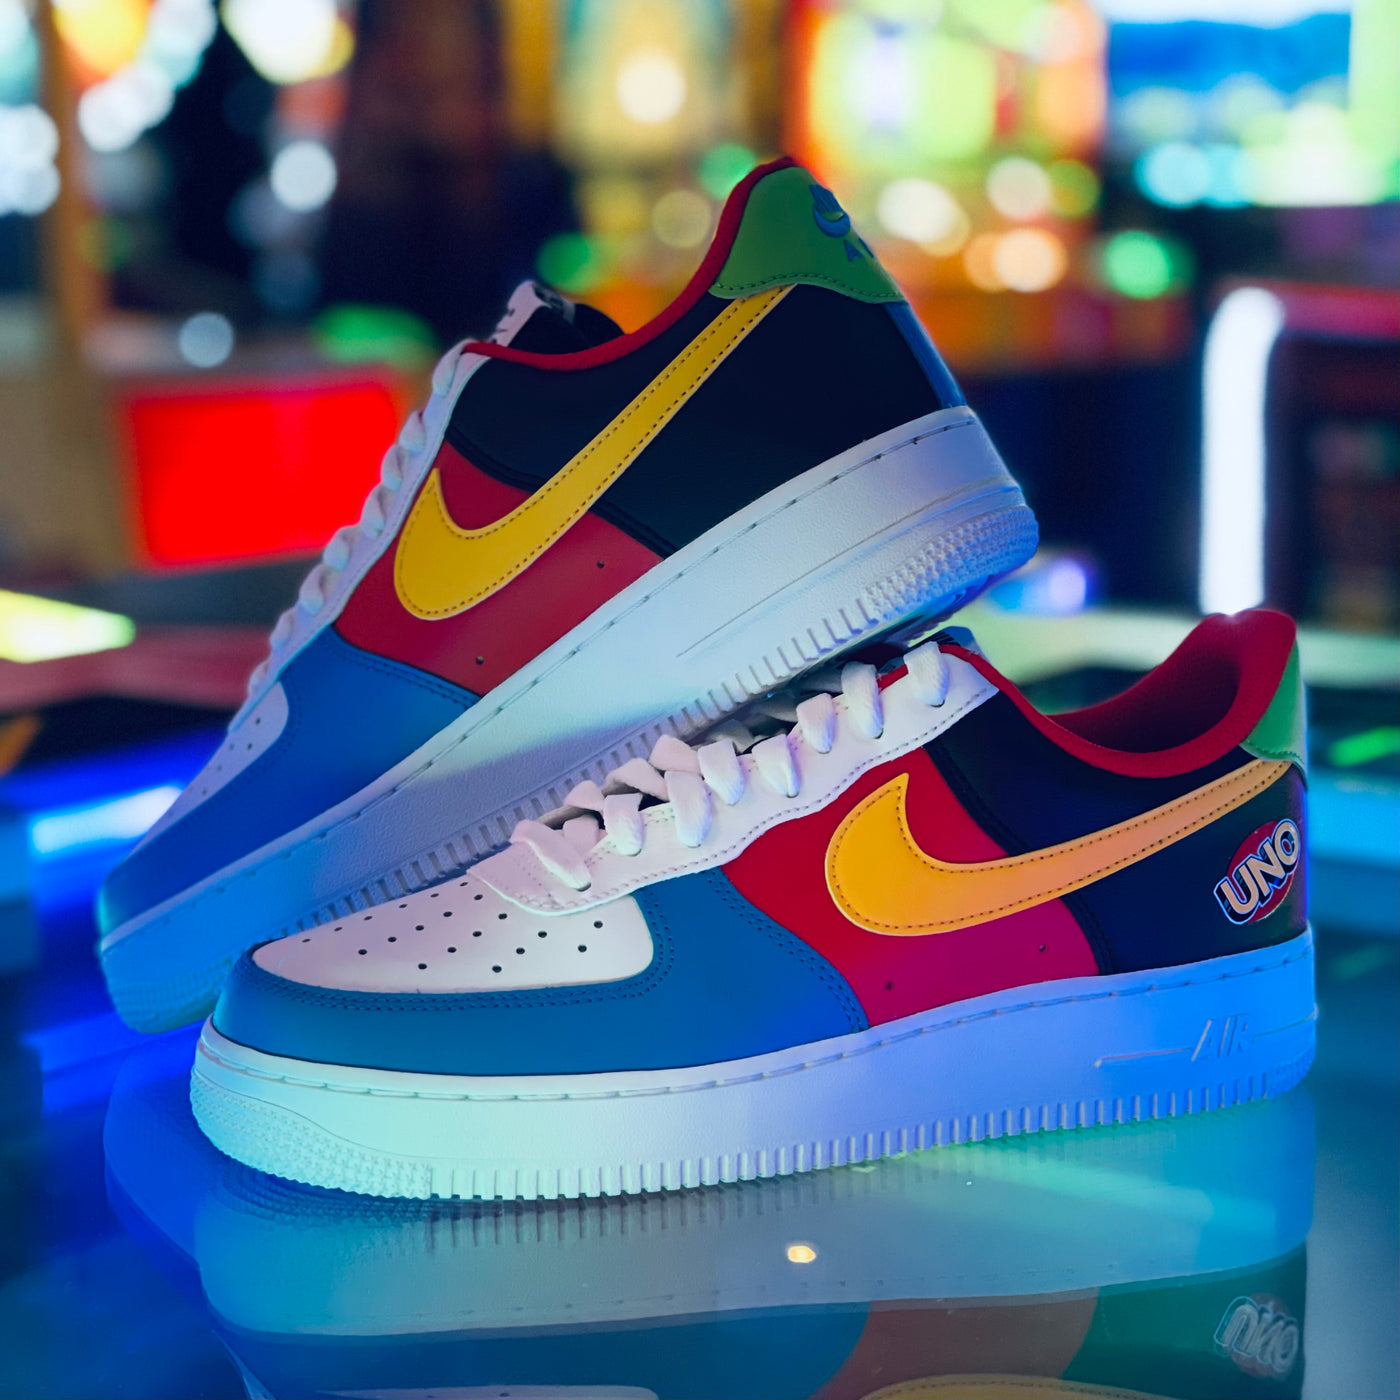 UNO x Nike Air Force 1 Low LV8 QS Wild Card Release Date